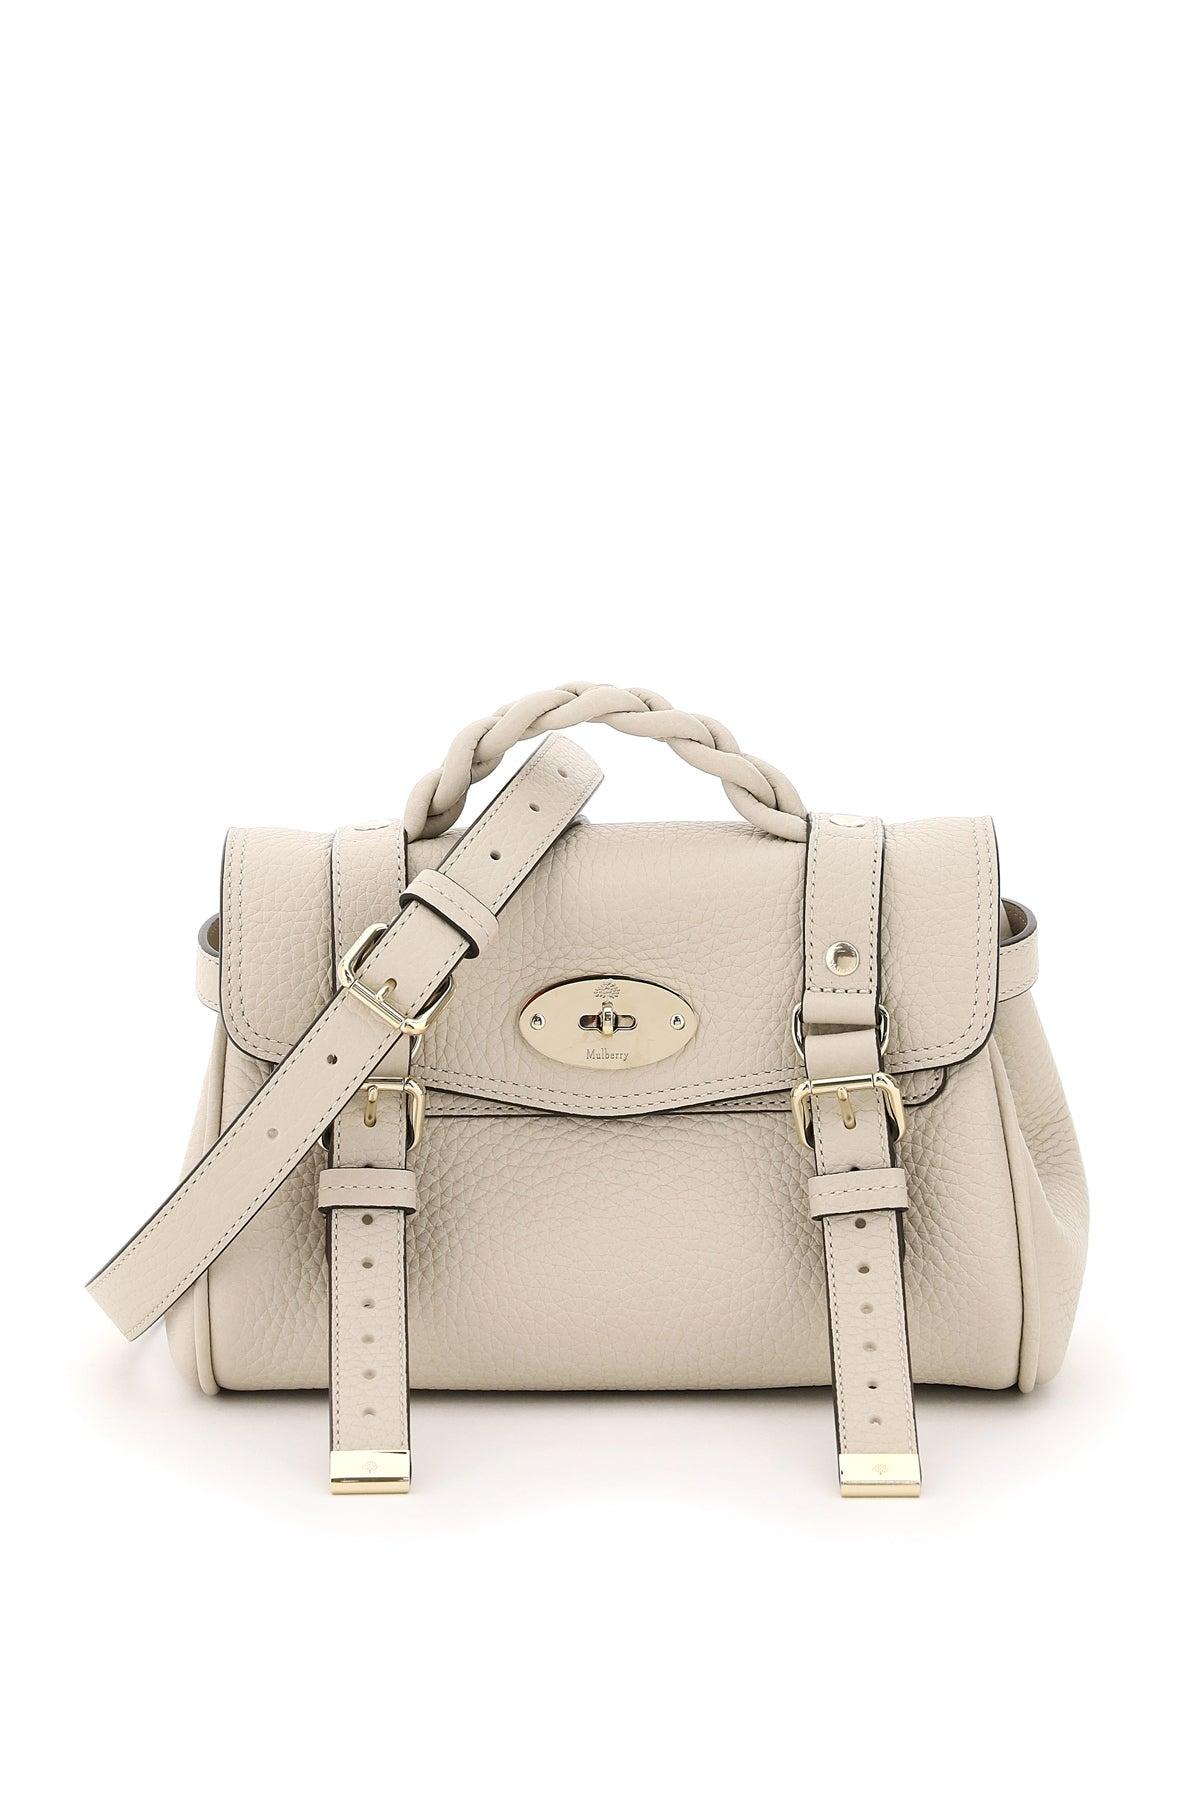 Mulberry Alexa Grained Leather Mini Bag in Natural | Lyst